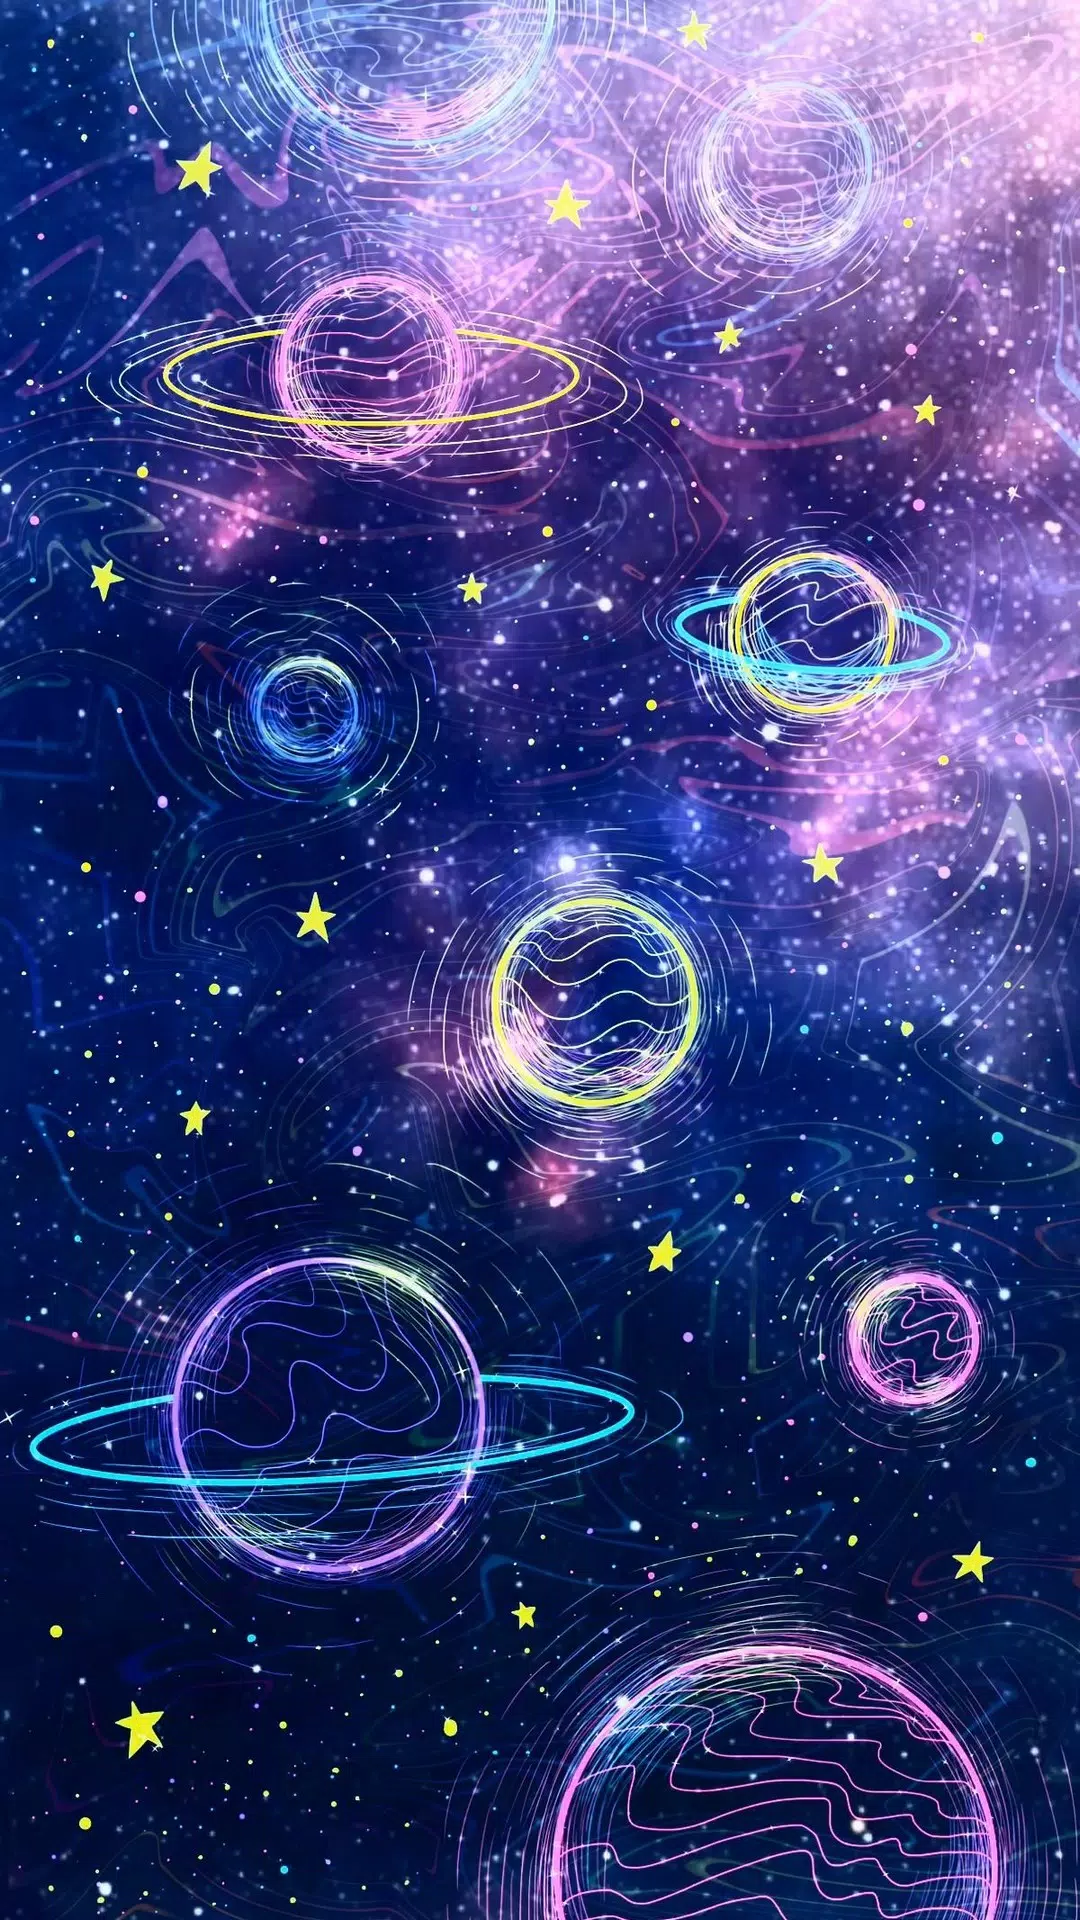 A digital image of a space scene with neon planets and stars - Galaxy, planet